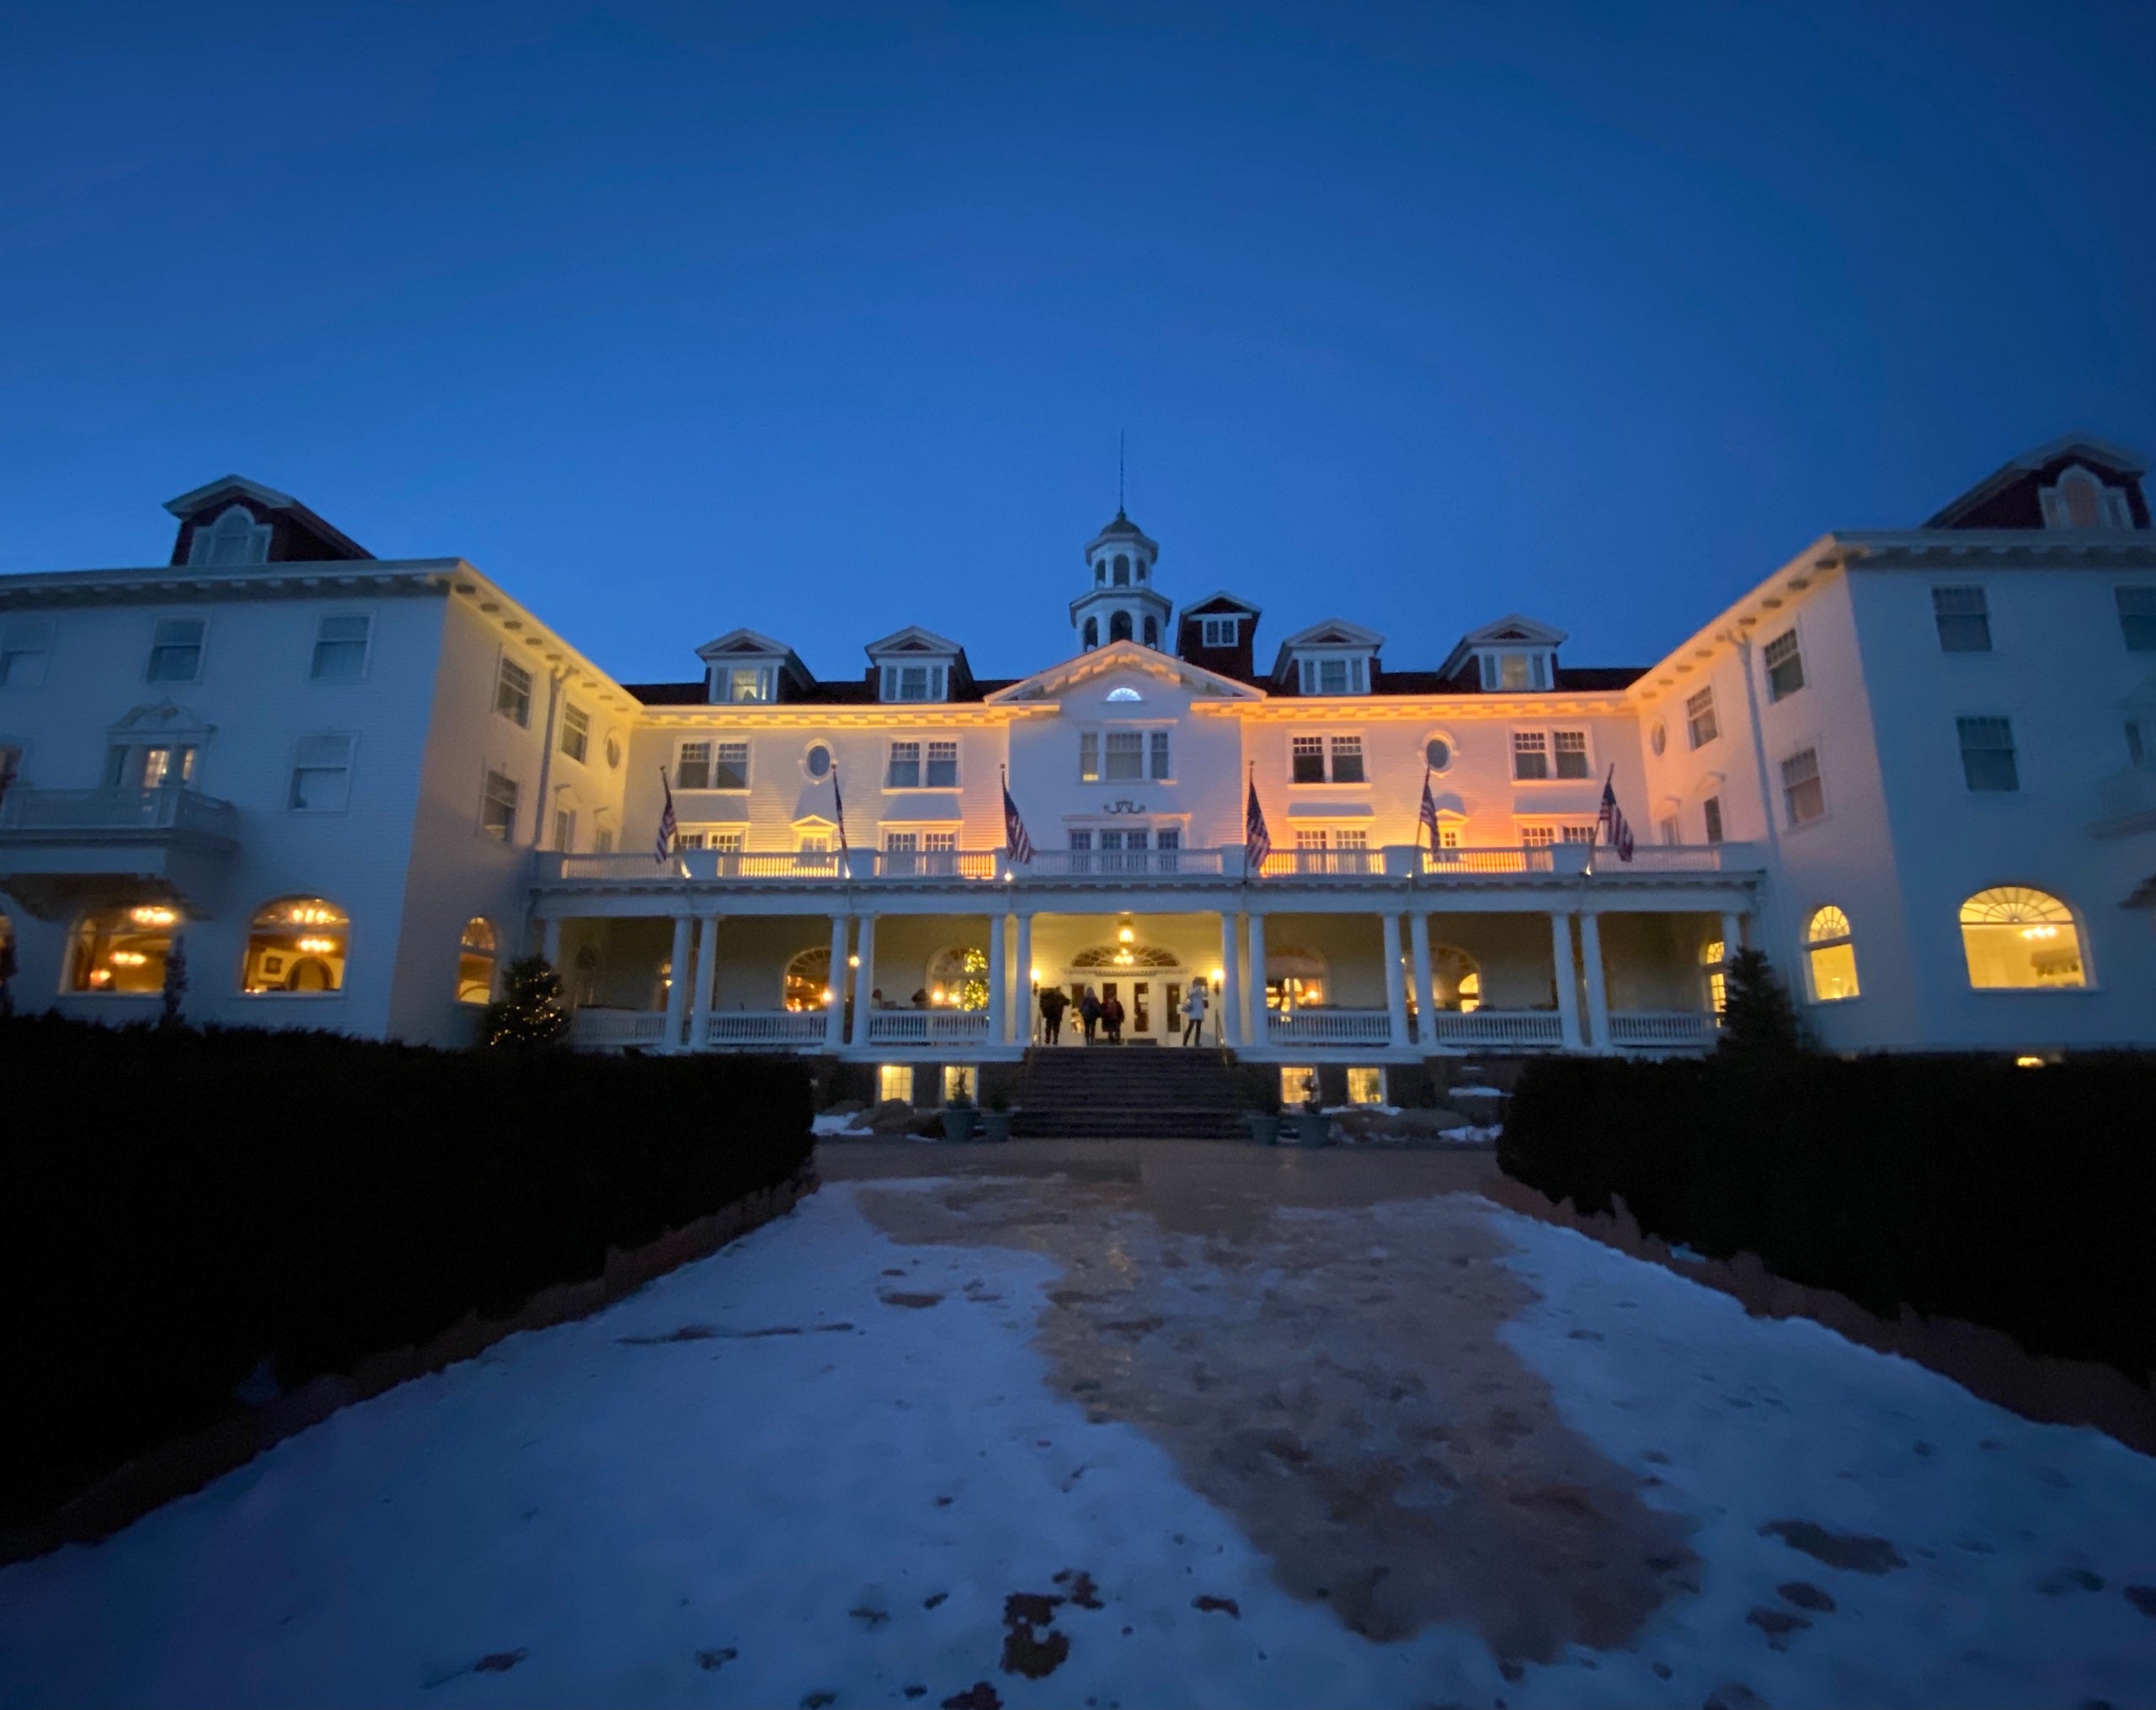 You are currently viewing Would you stay at 1 of these 8 haunted hotels this Halloween?